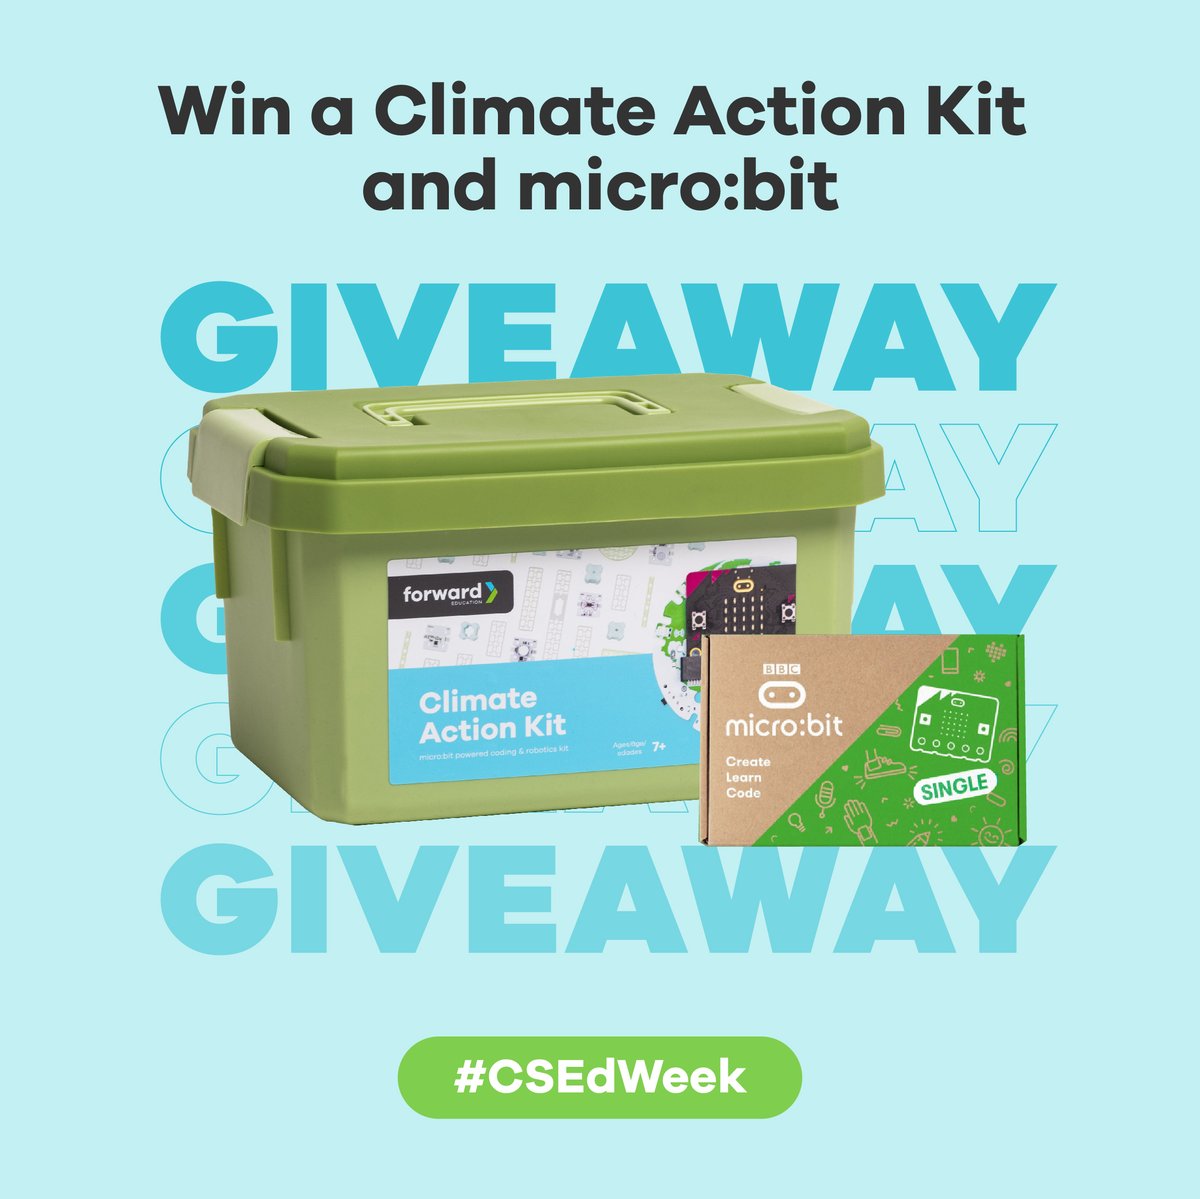 *Drum roll please* 🥁
🌟WE HAVE OUR #CSEDWEEK WINNERS! 🌟
Congrats on winning a Climate Action Kit and micro:bit!
@hollowayreader & @michellesbettis  
@MissJShields1 
@LoriTecler & @lori_huntsman 
@Gregbagby & @hannahEbagby 
We can’t wait to see the fun things you create! 🌎🤖